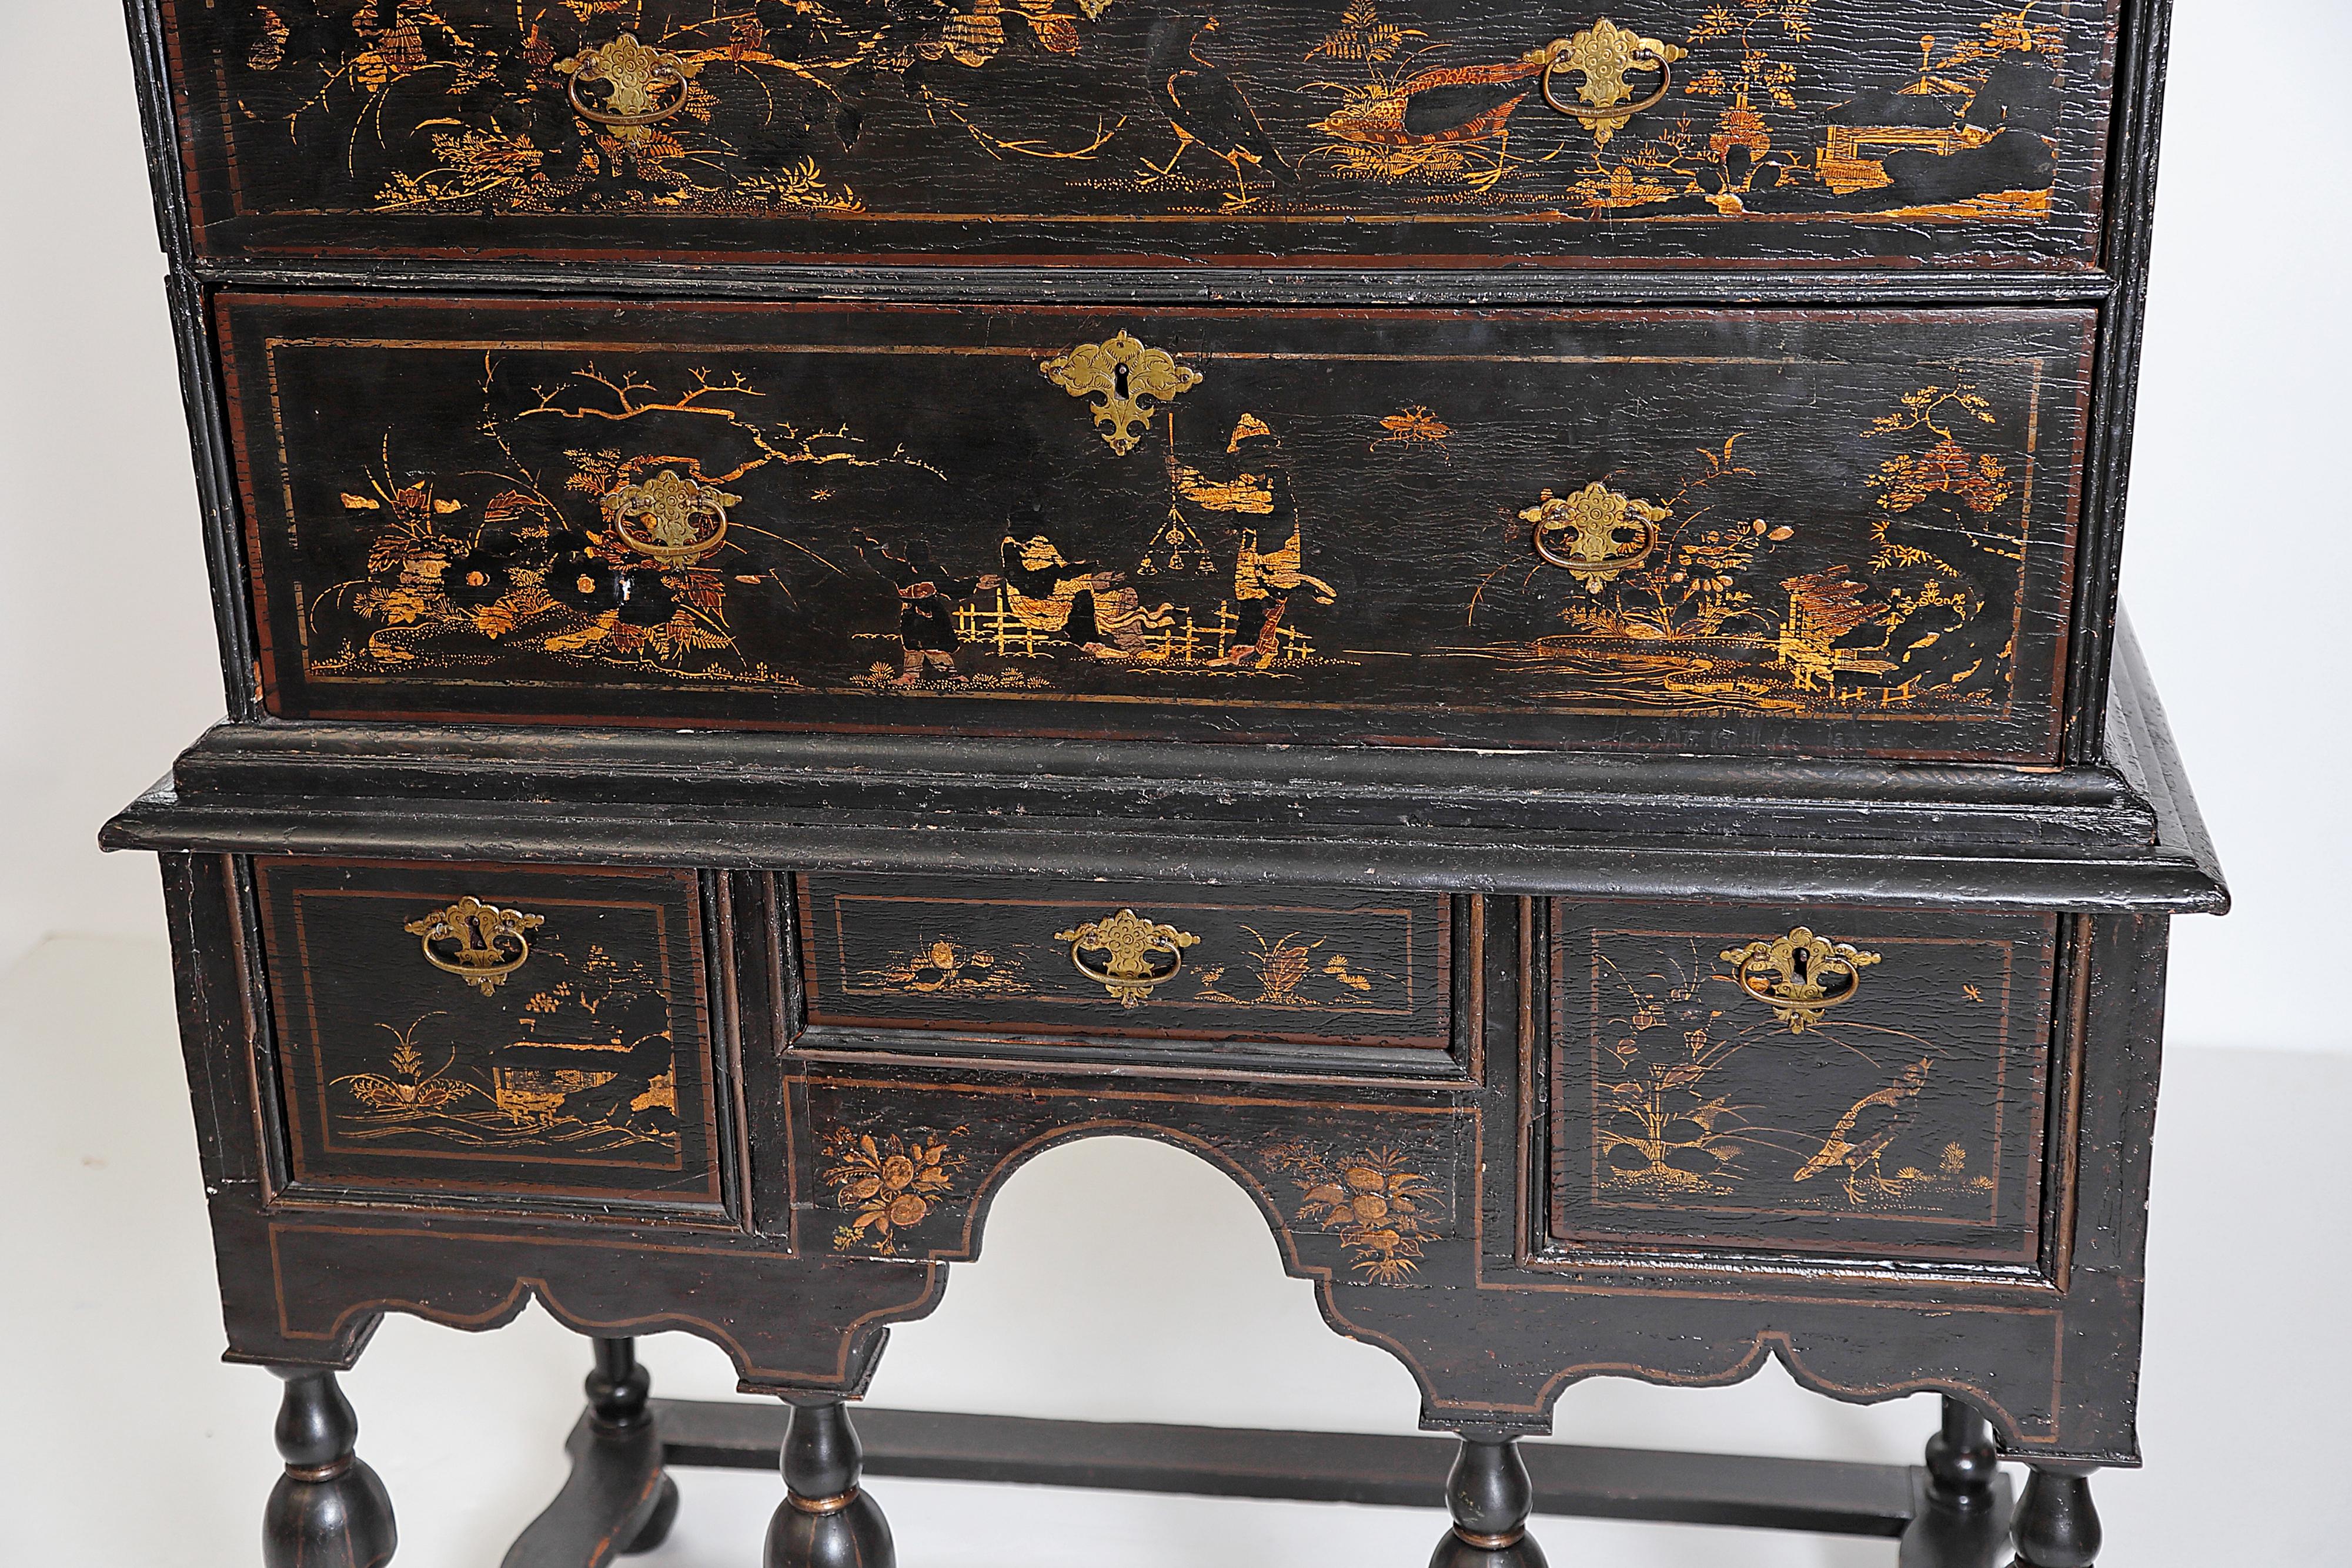 Late 17th-early 18th century William and Mary chest on stand with gilt chinoiserie decoration, Japanned, raised gilt decoration missing and worn in places, especially heads and bodies of people, flowers and leaves, and birds (see attached images),